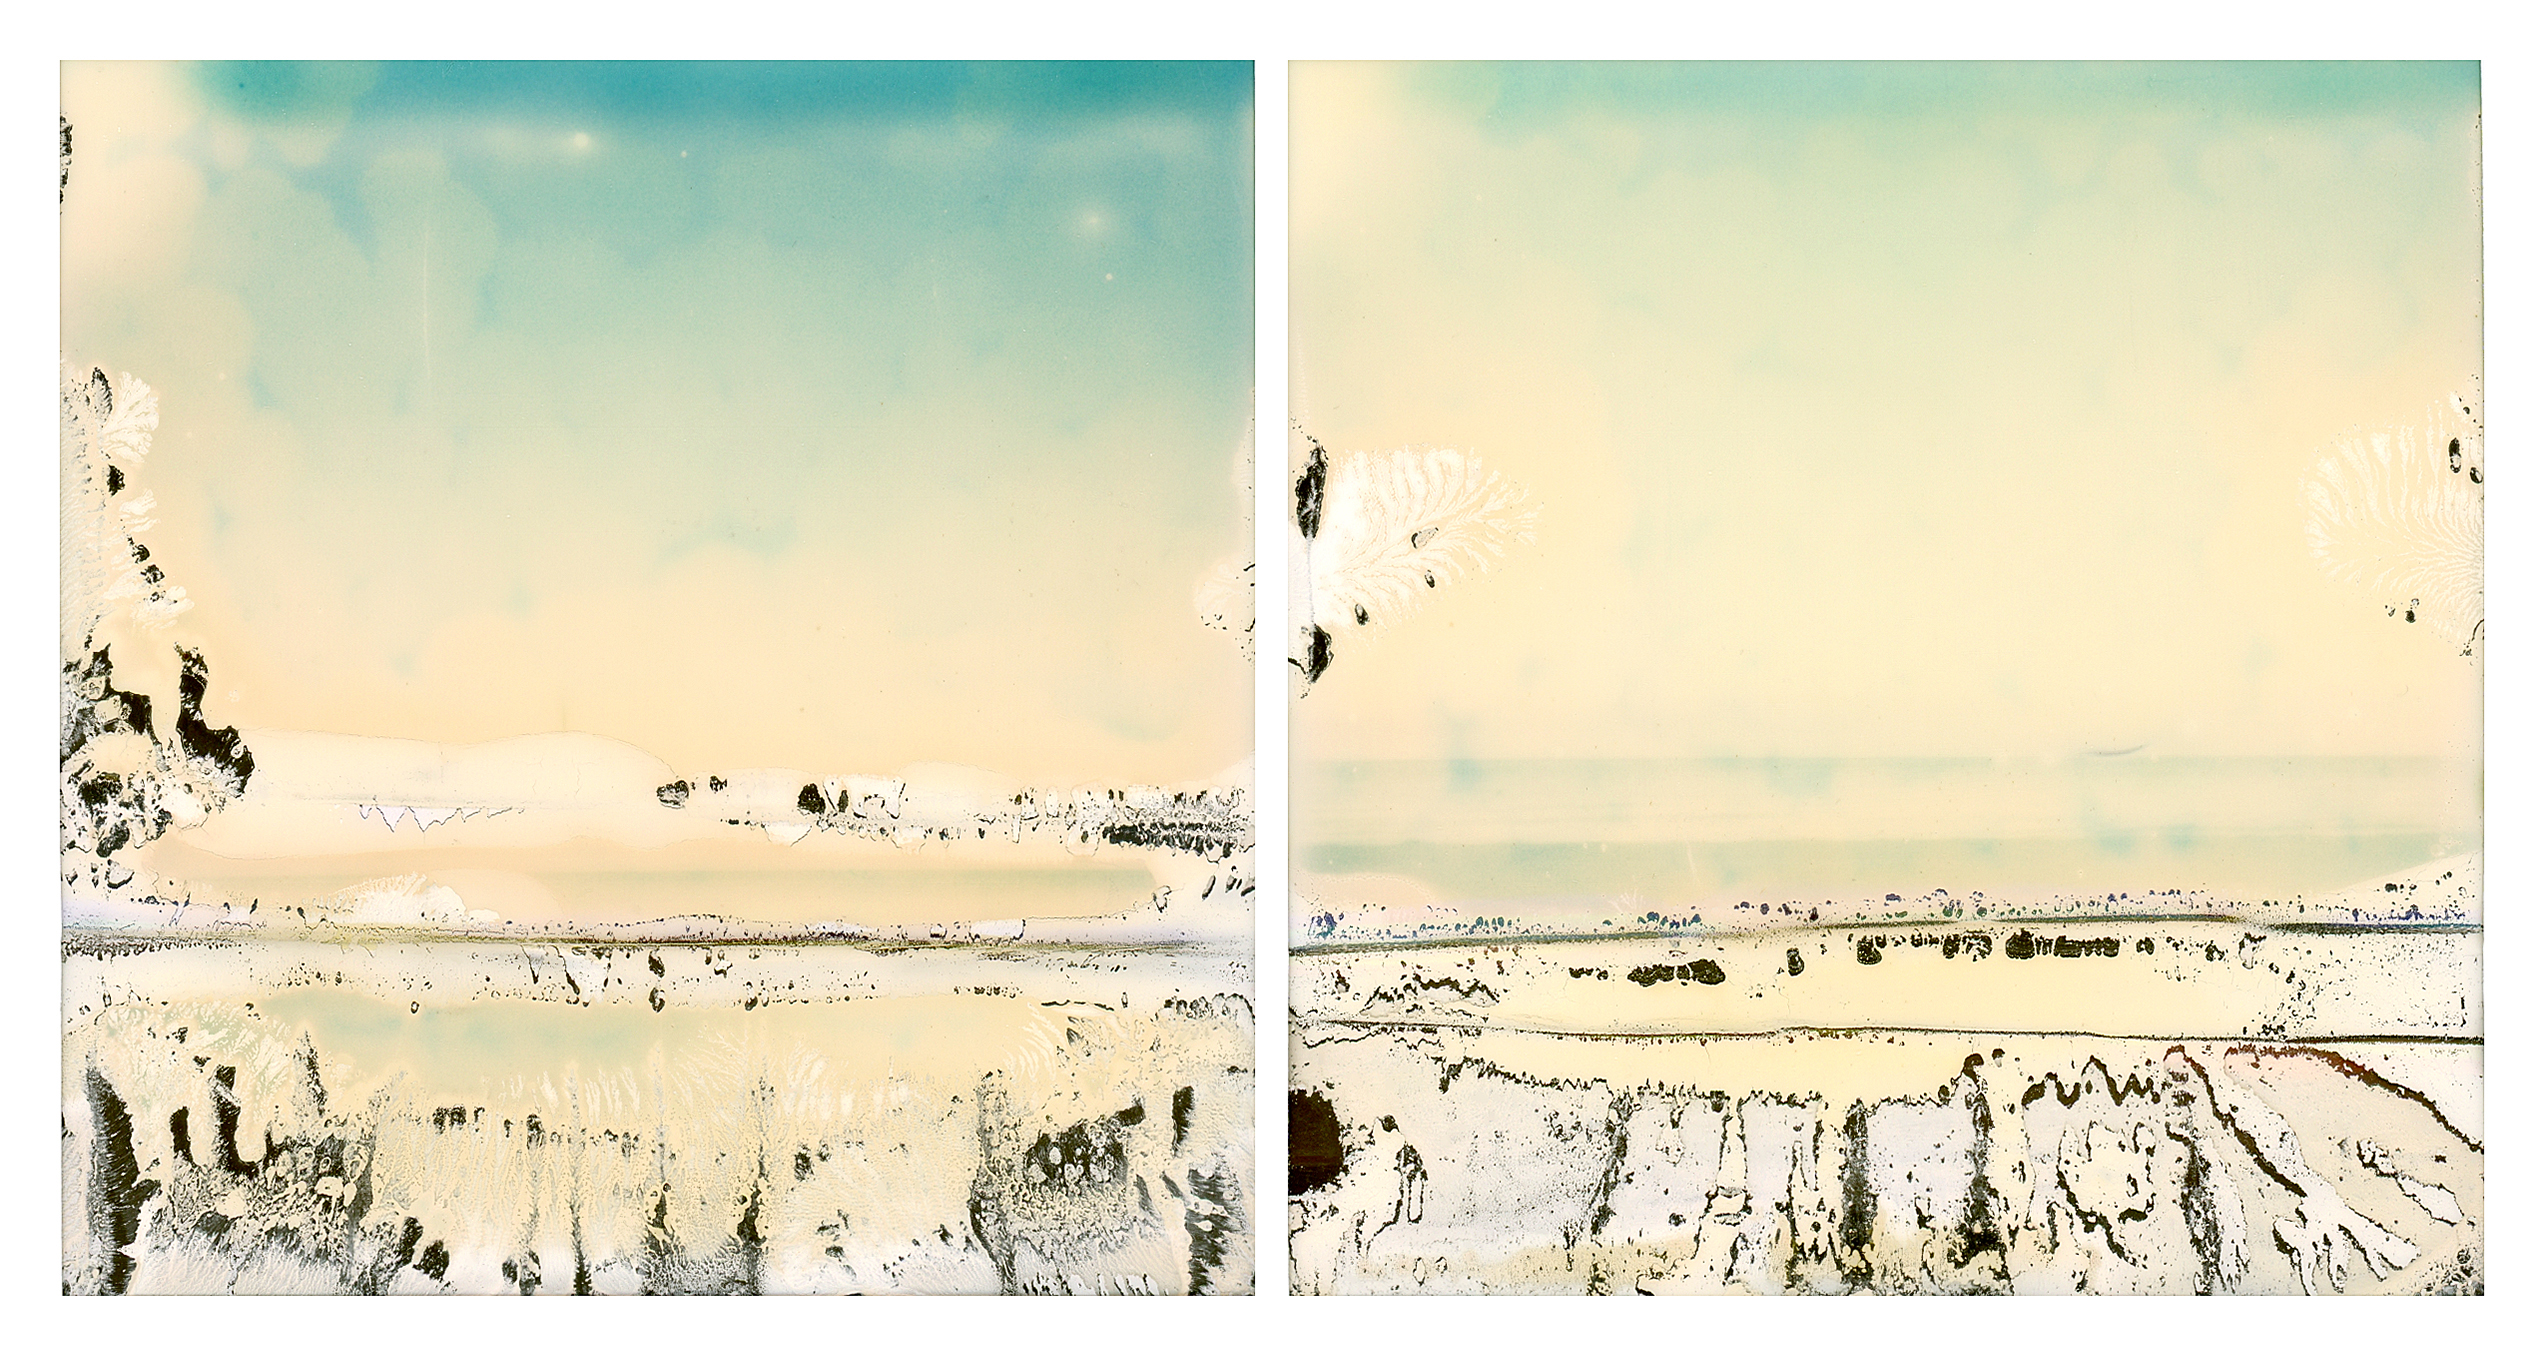 Liminal Spaces Diptych V by Carissa “C” Meier